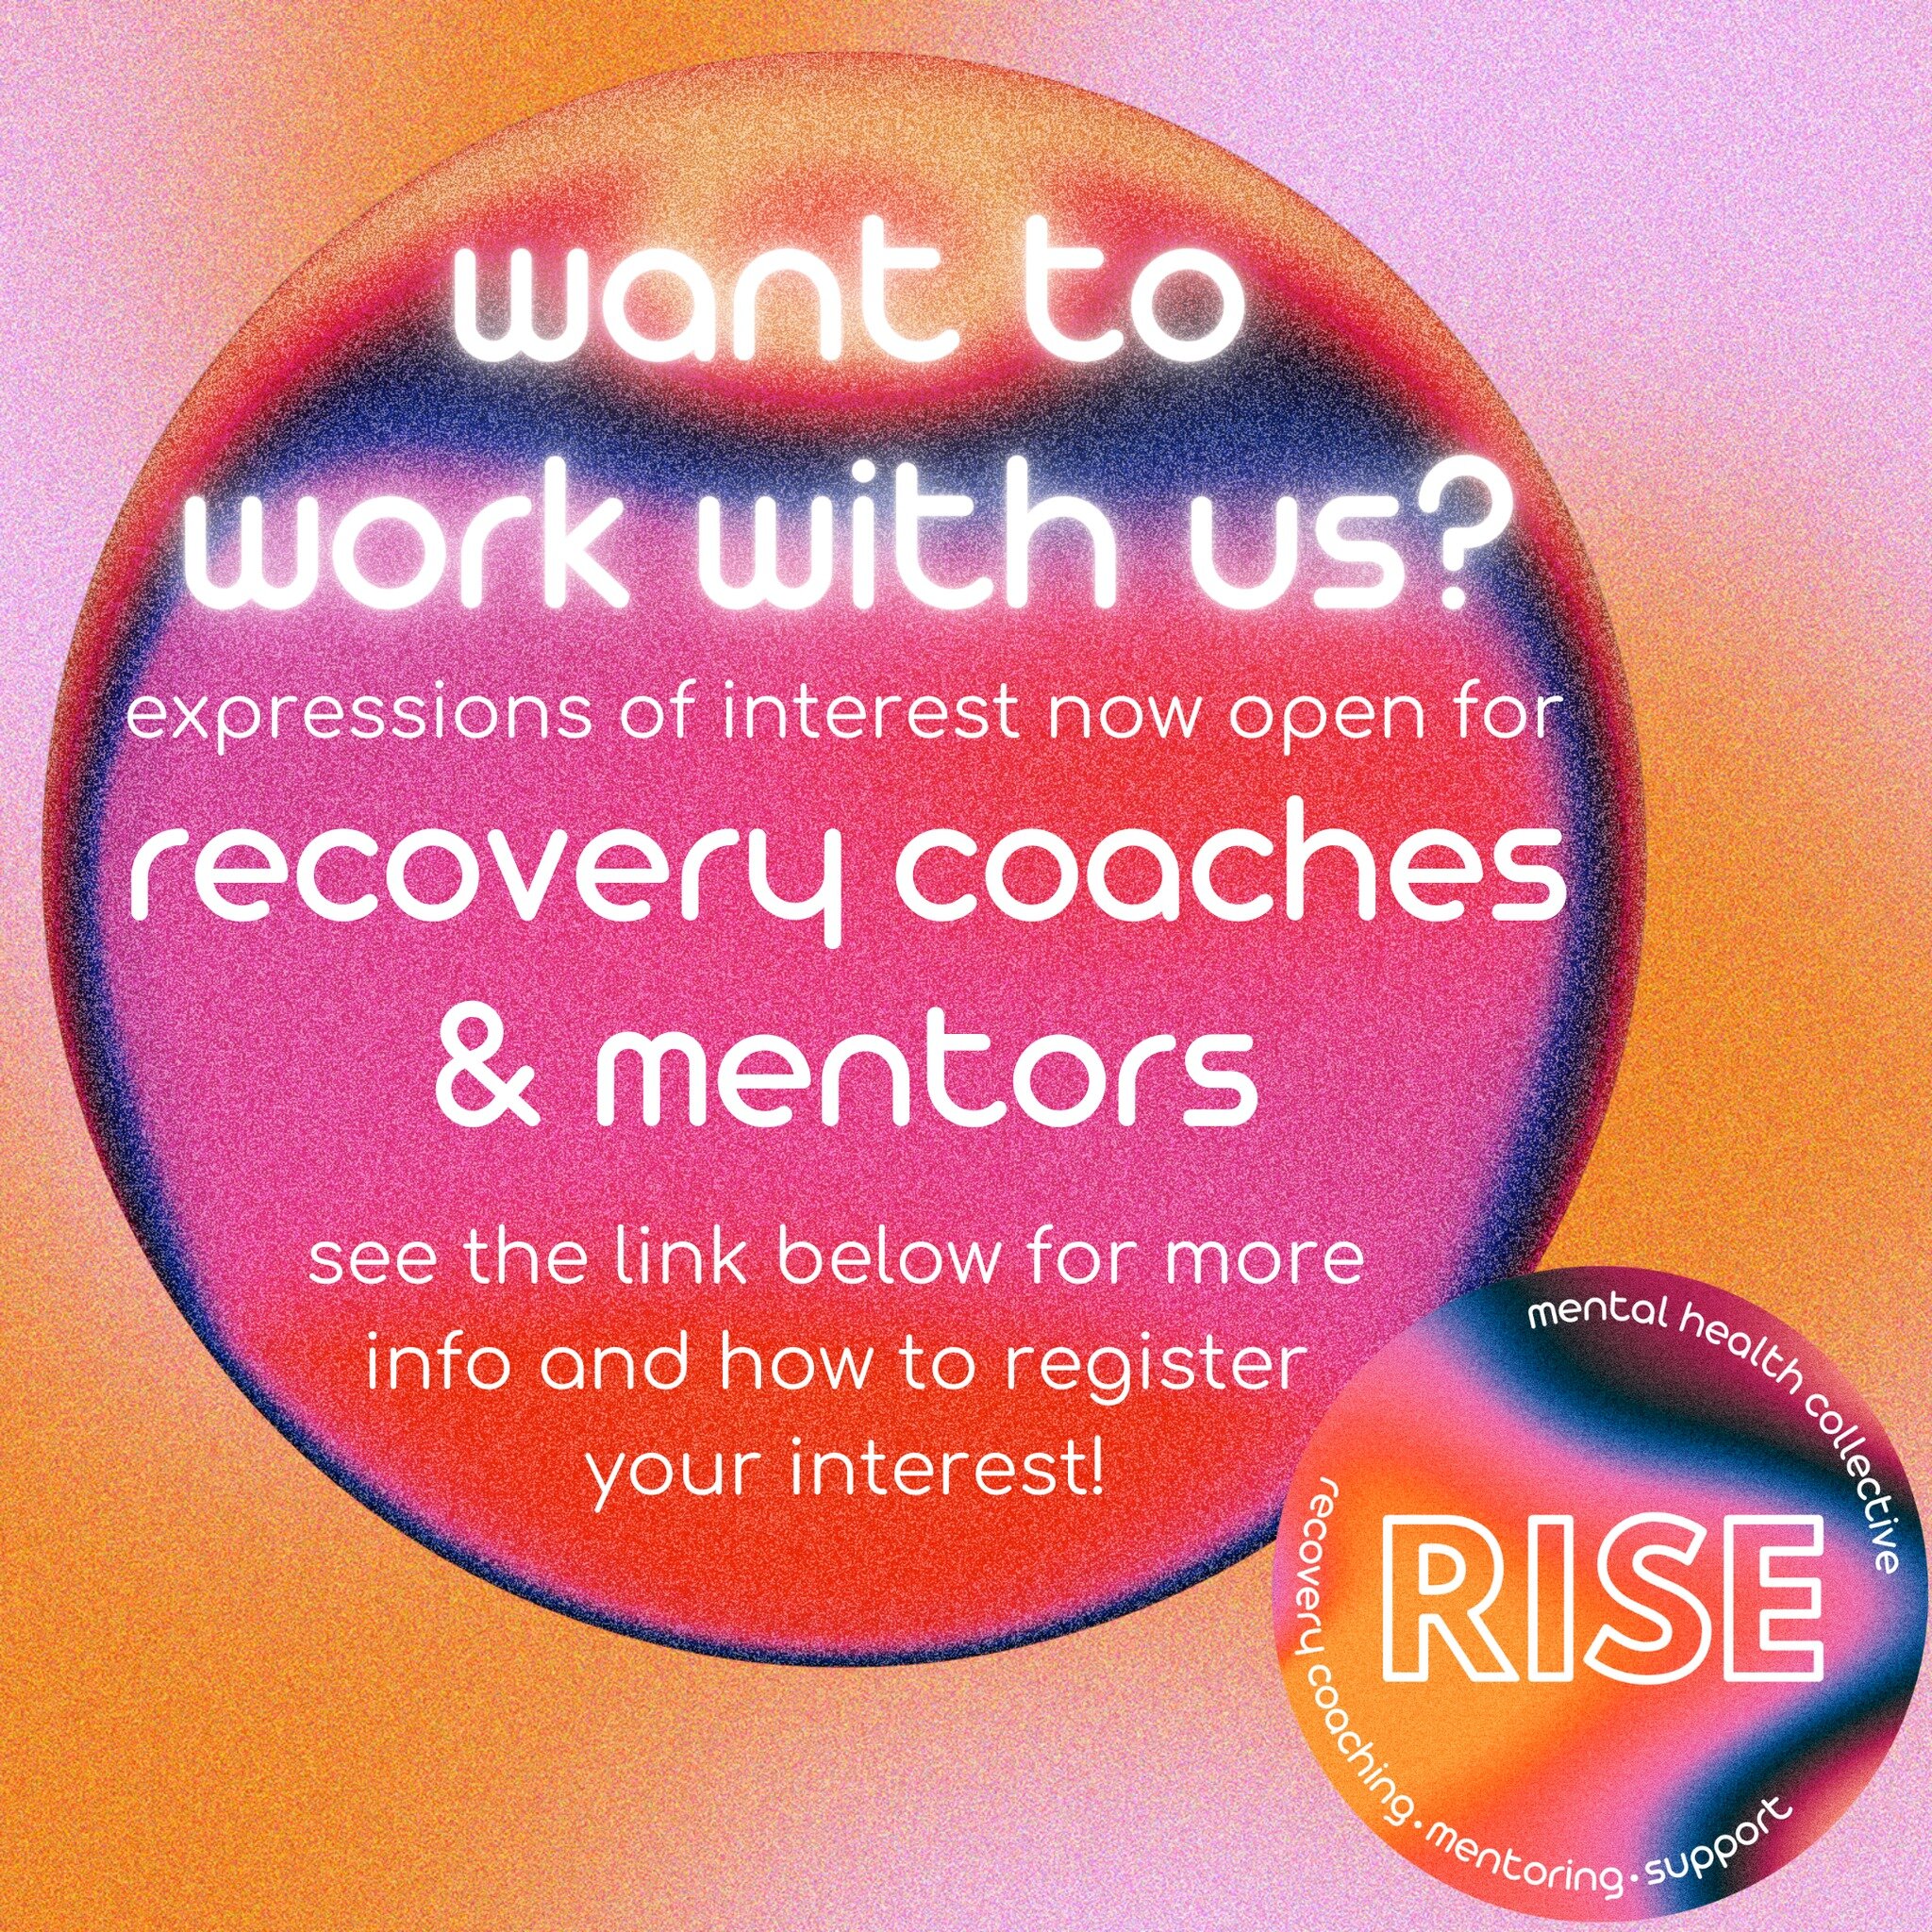 Hey everyone!

The time has come! We're looking for Expressions of Interest for a Recovery Coach/Mentor at RISE Mental Health Collective.

It's a super exciting time here at RISE and I cannot wait to see what comes our way. We're getting bigger and b